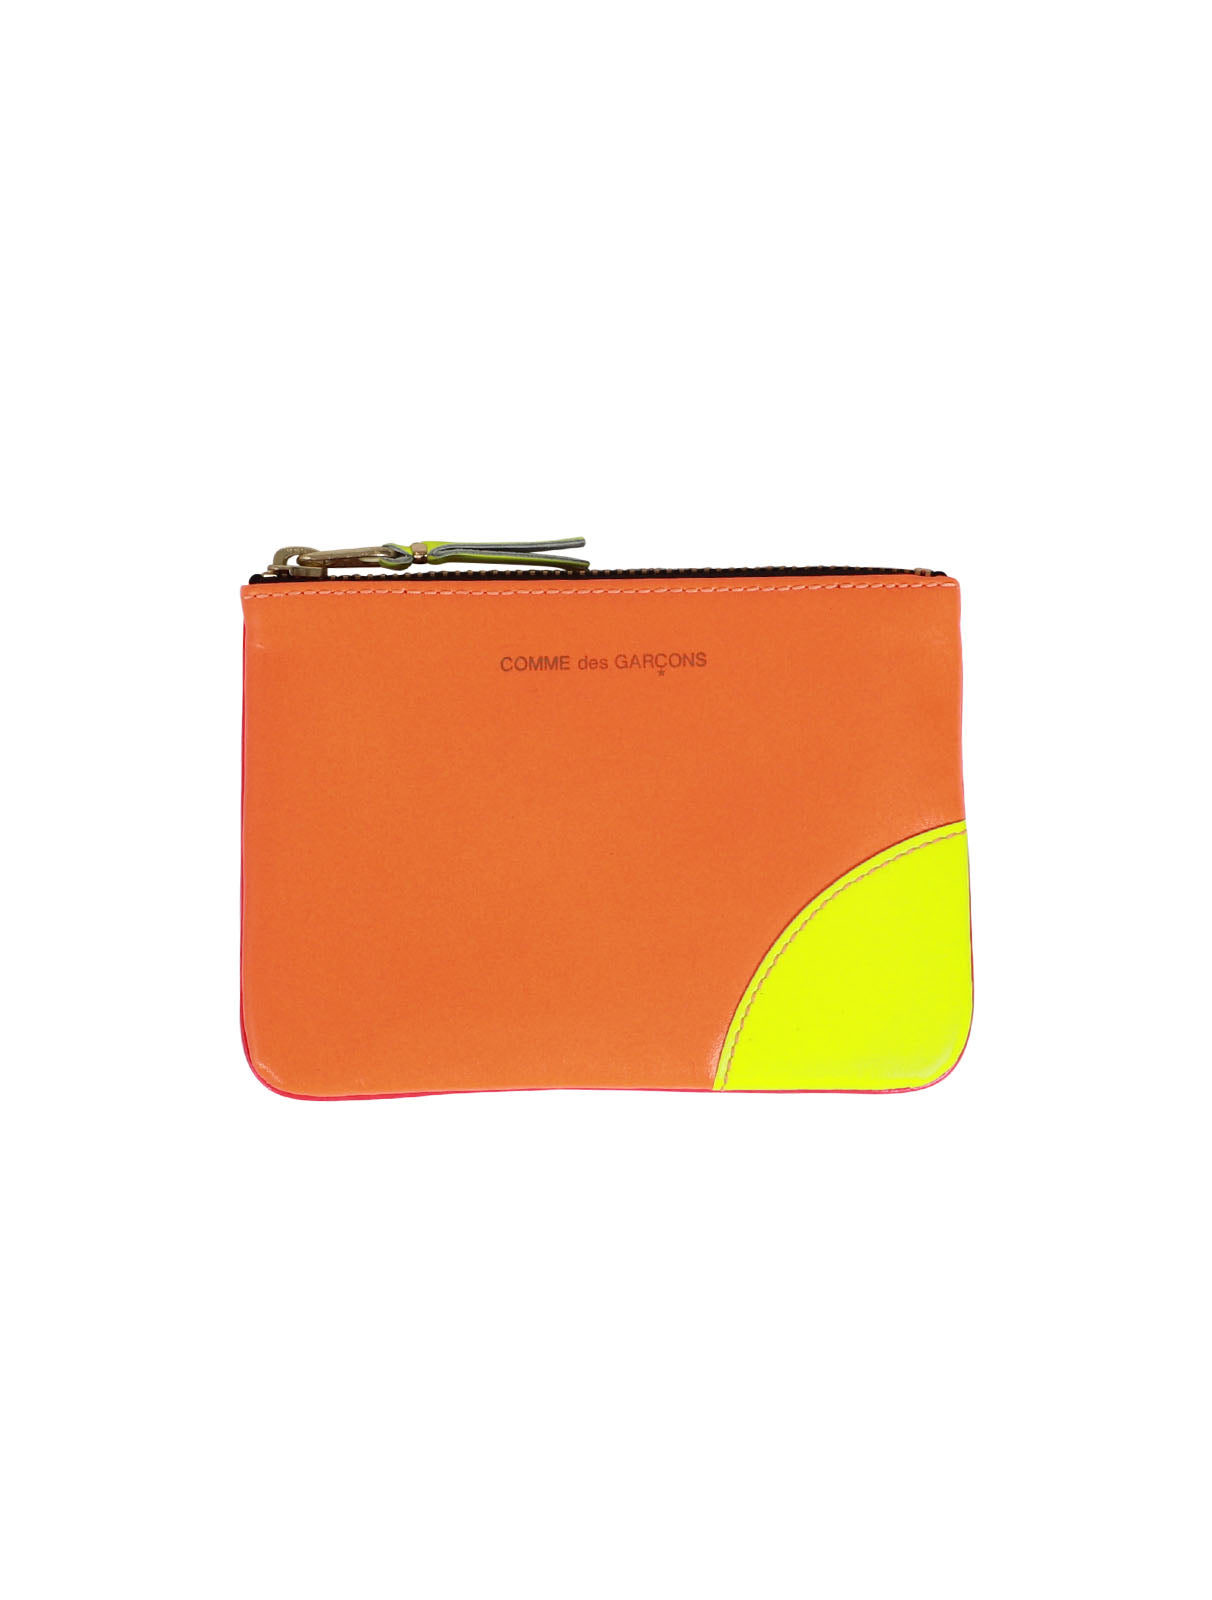 Super Fluo Small Zip Pouch Wallet